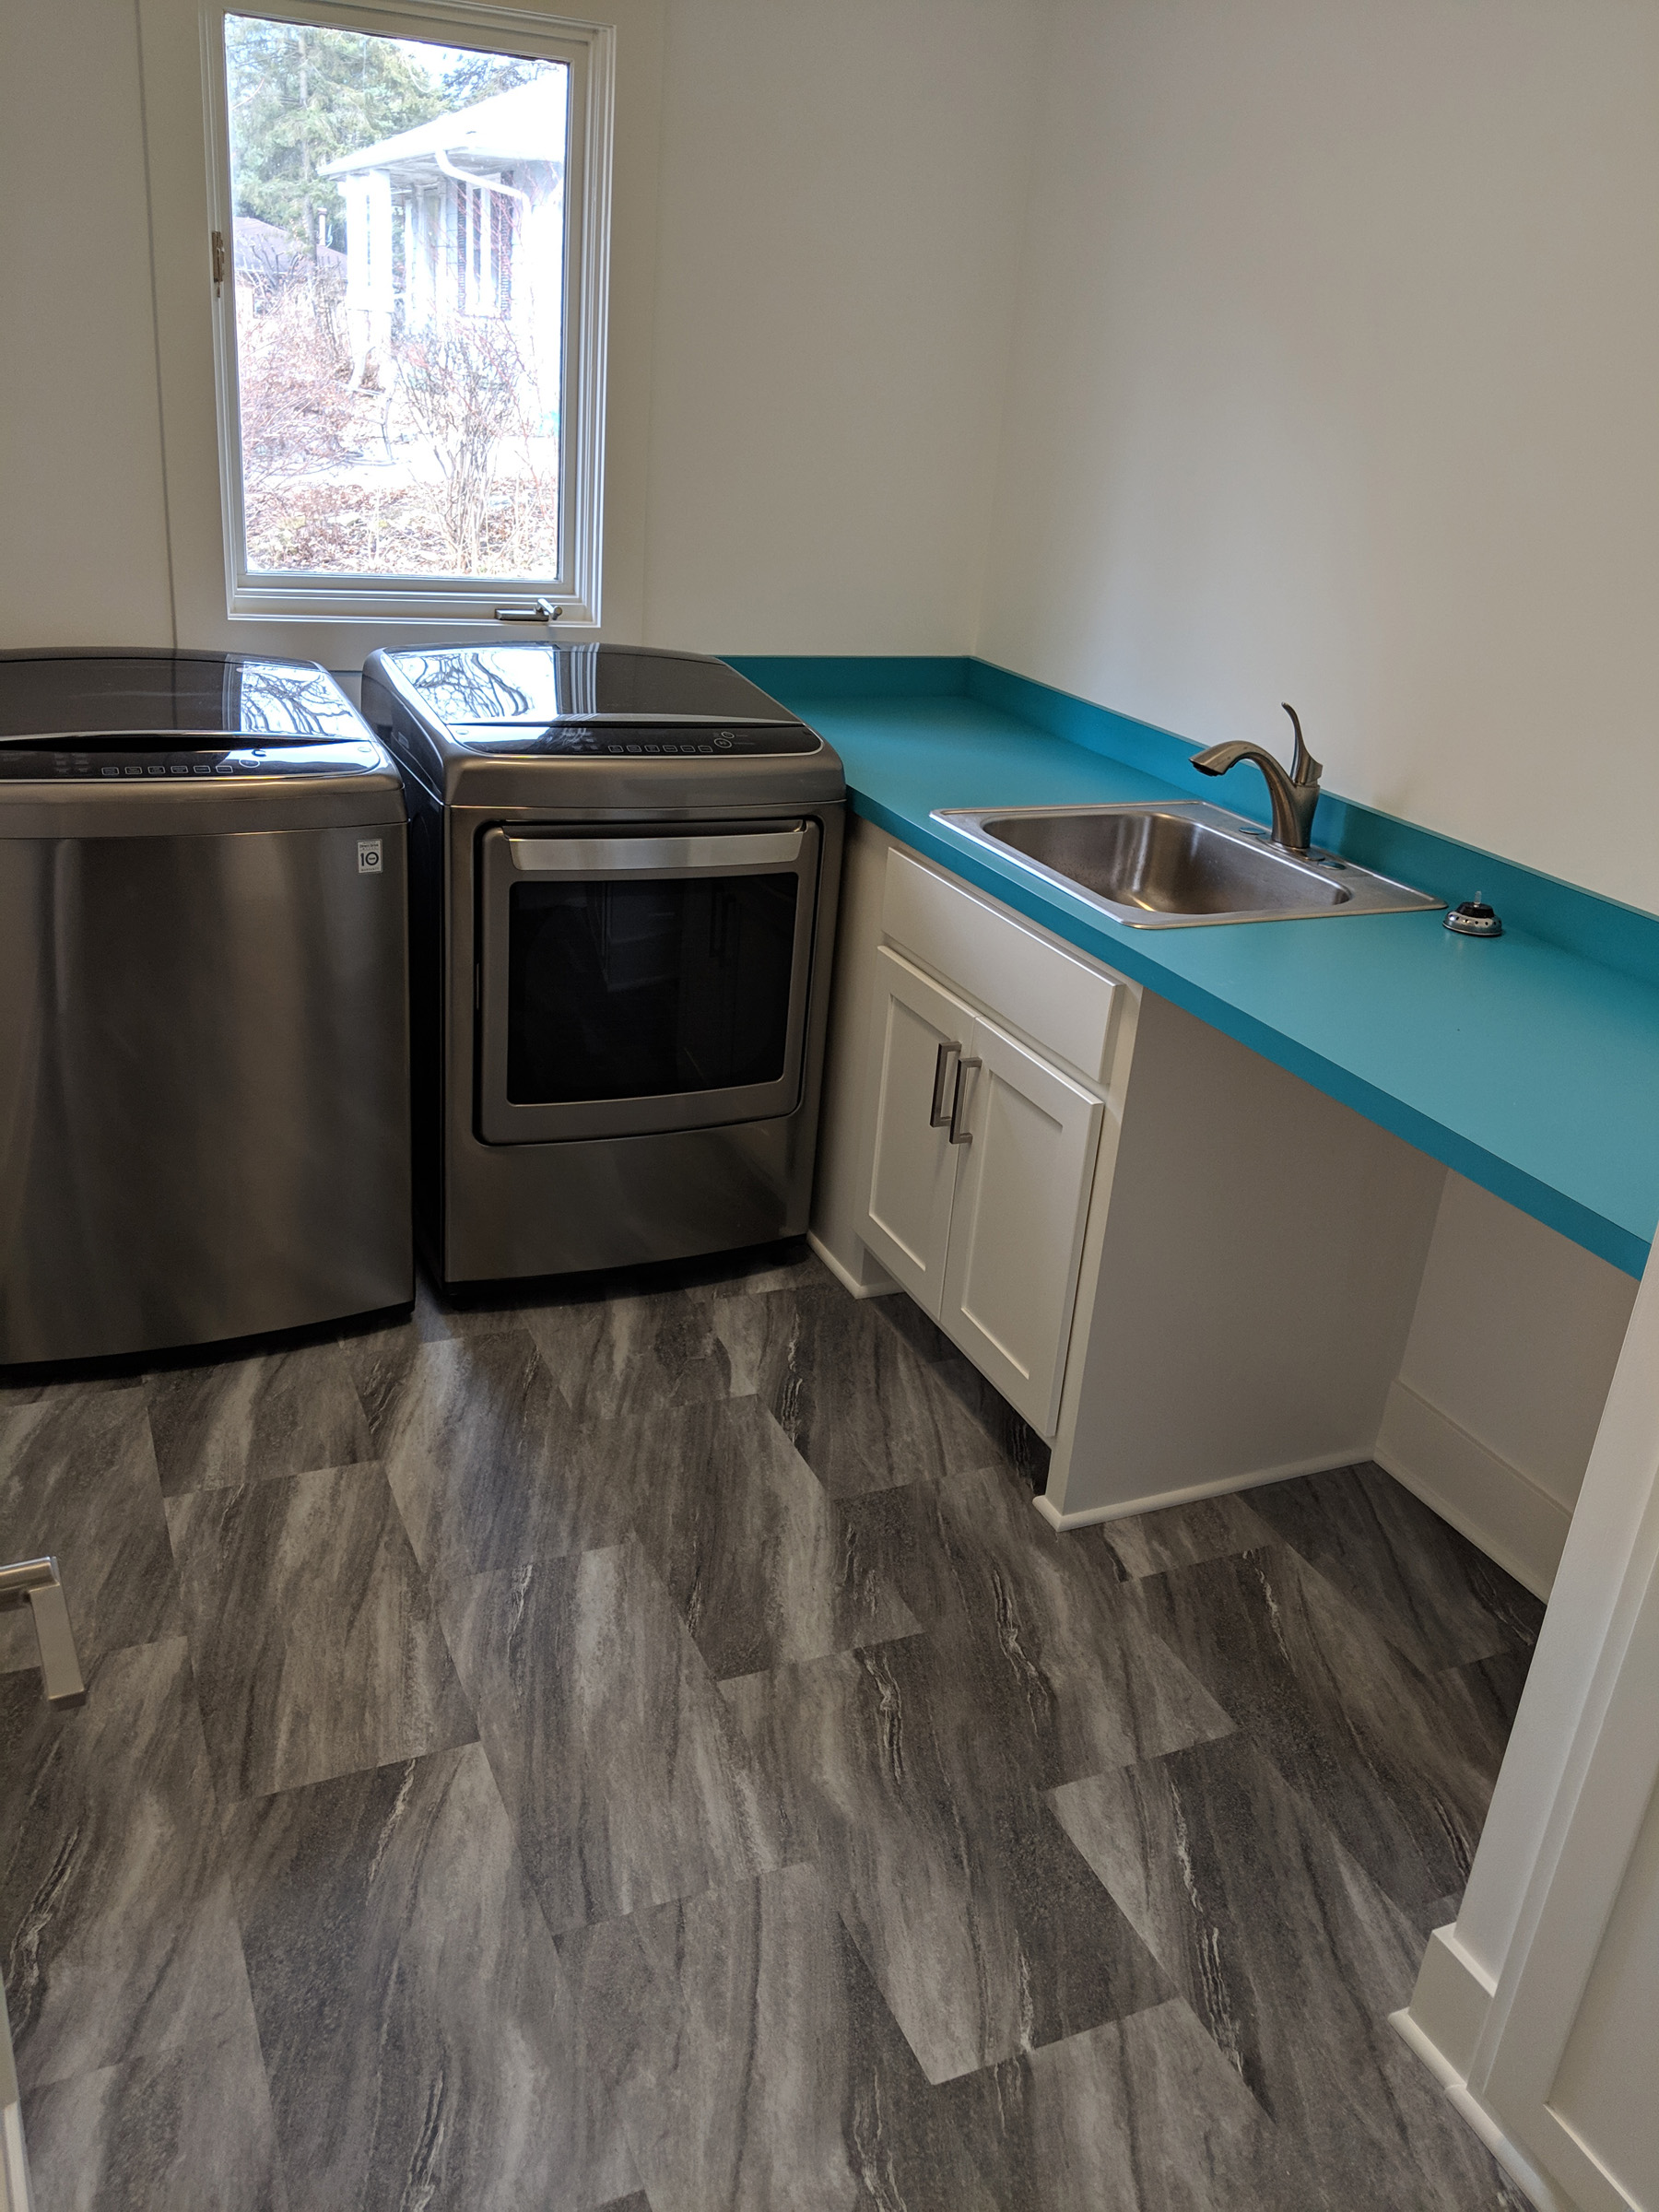 Laundry room you can love!